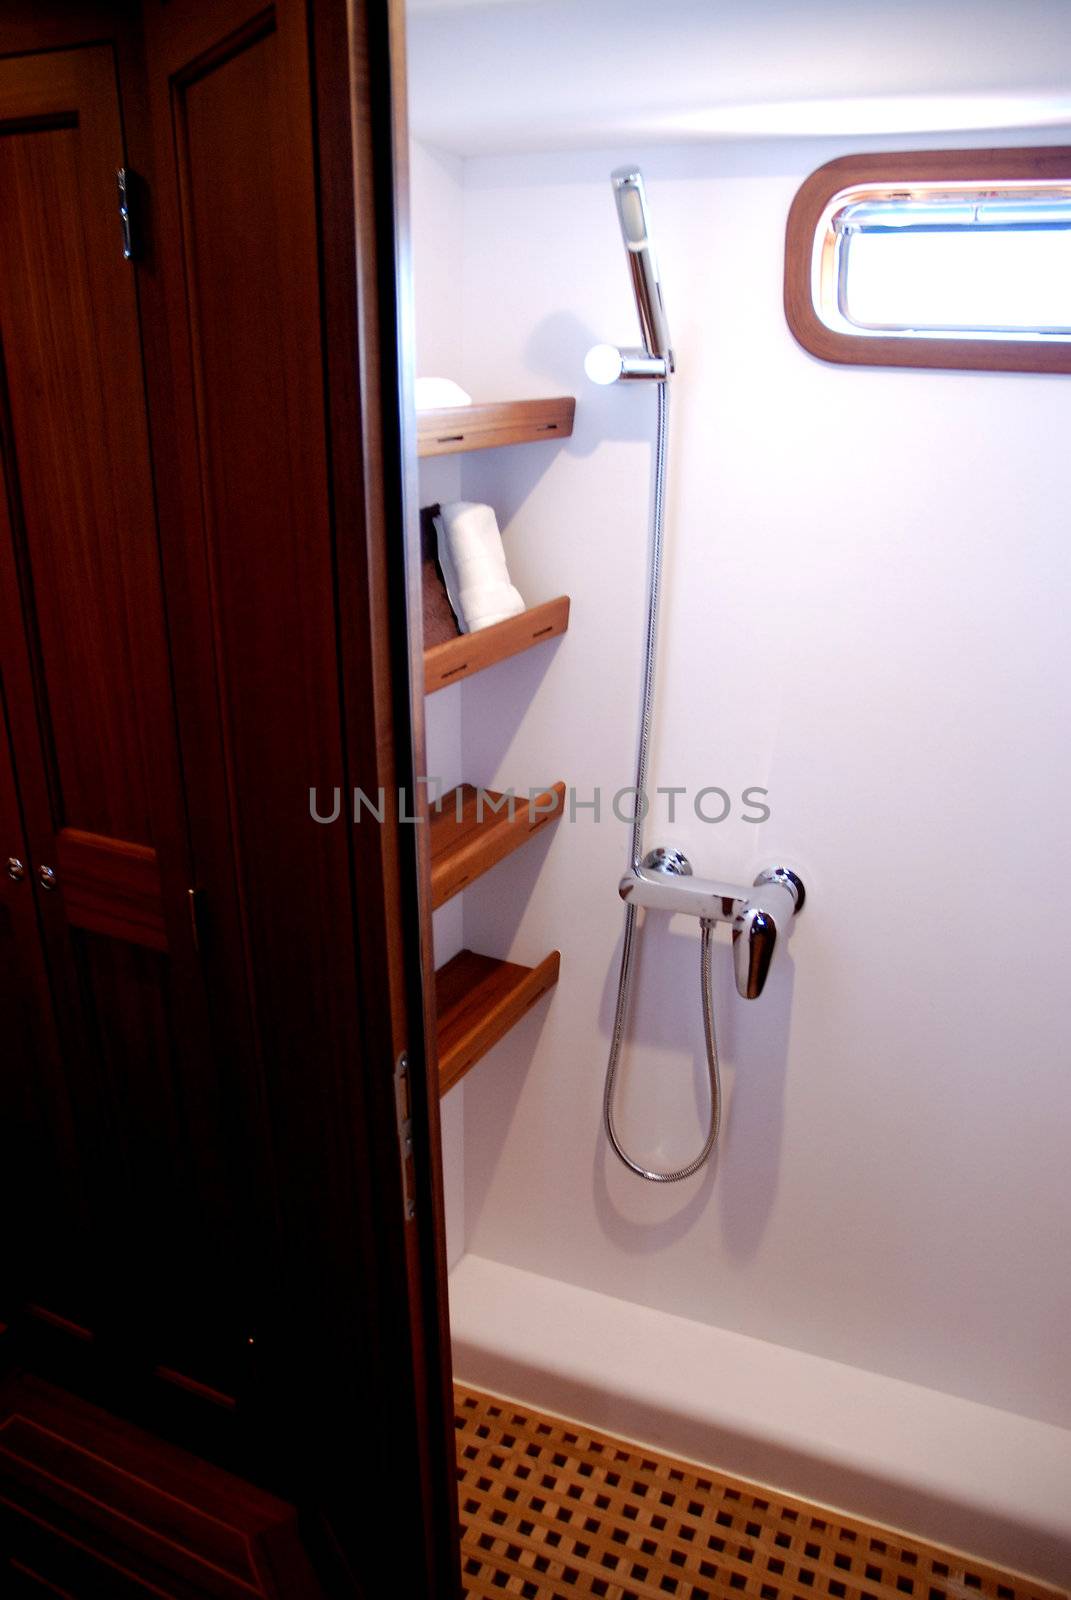 Impression of the interior of a small deluxe yacht, showing the intimate forward cabin and the heads compartment, displaying the v-shaped bunk beds, 360 degrees mahogany wood panelling, the shower and toilet compartment, including sink, and the custom built storage cabinets